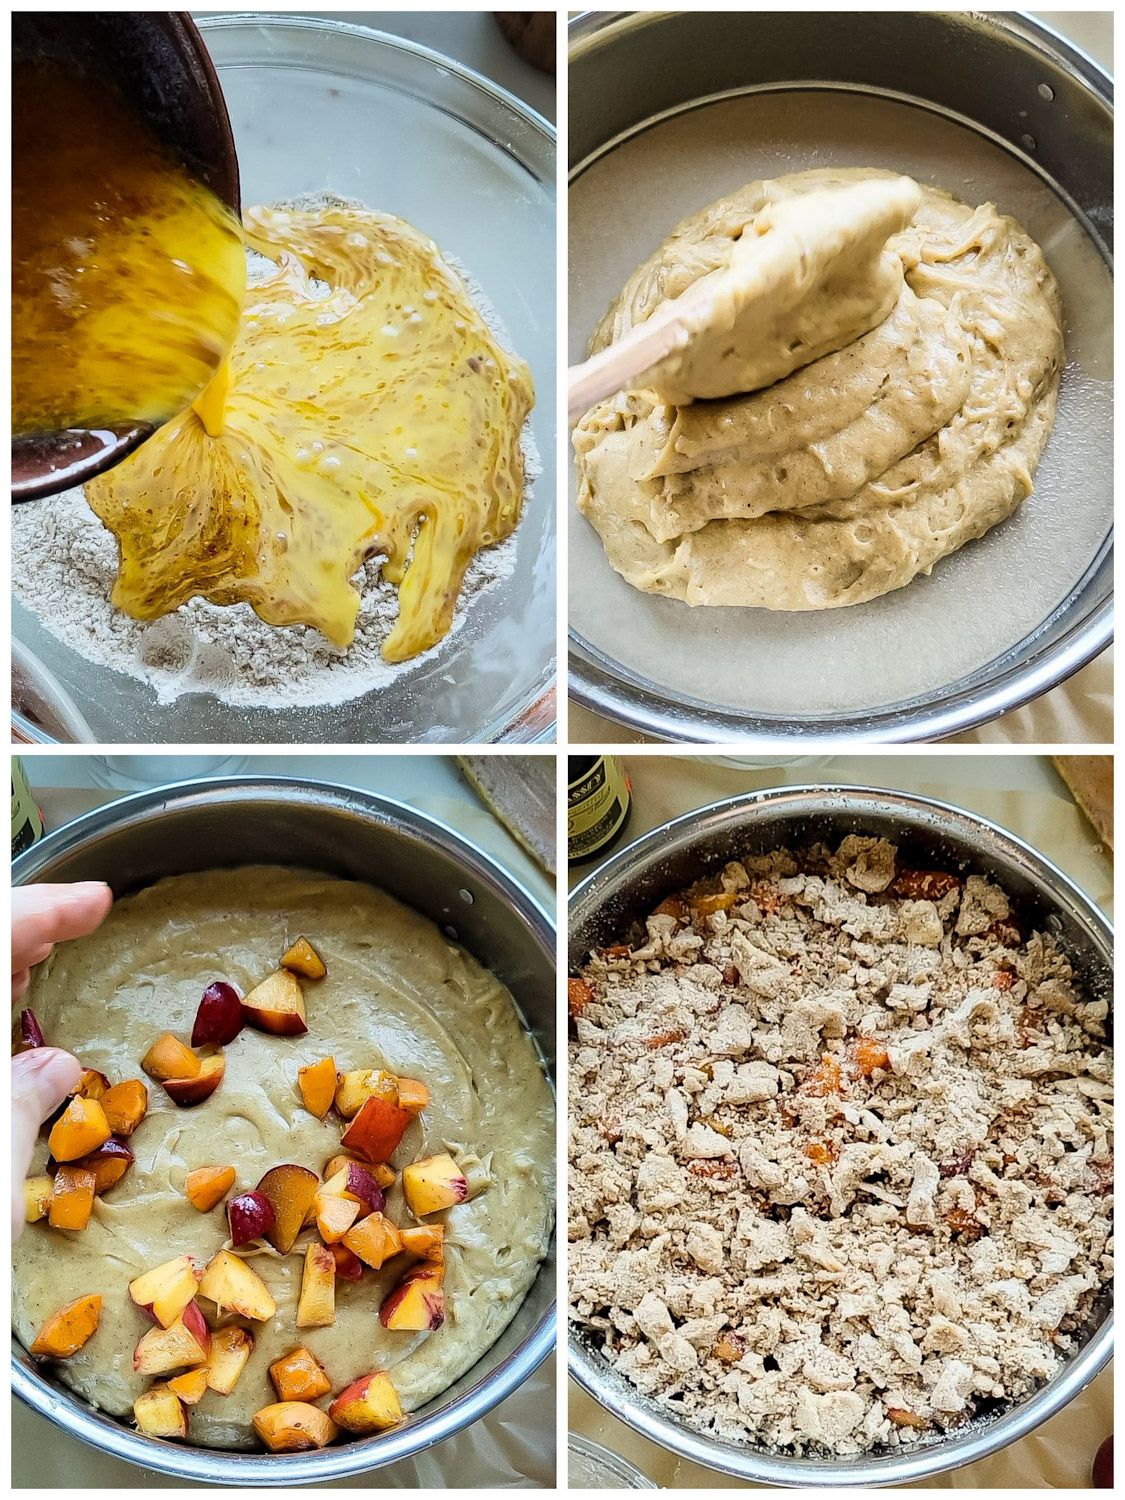 prep shots of Brown Butter Stone Fruit Streusel Coffee Cake. Pouring in the brown butter and eggs; spooning the batter into the prepared pan; scattering the cut fruit on top of the batter; and finishing with the spiced streusel topping.